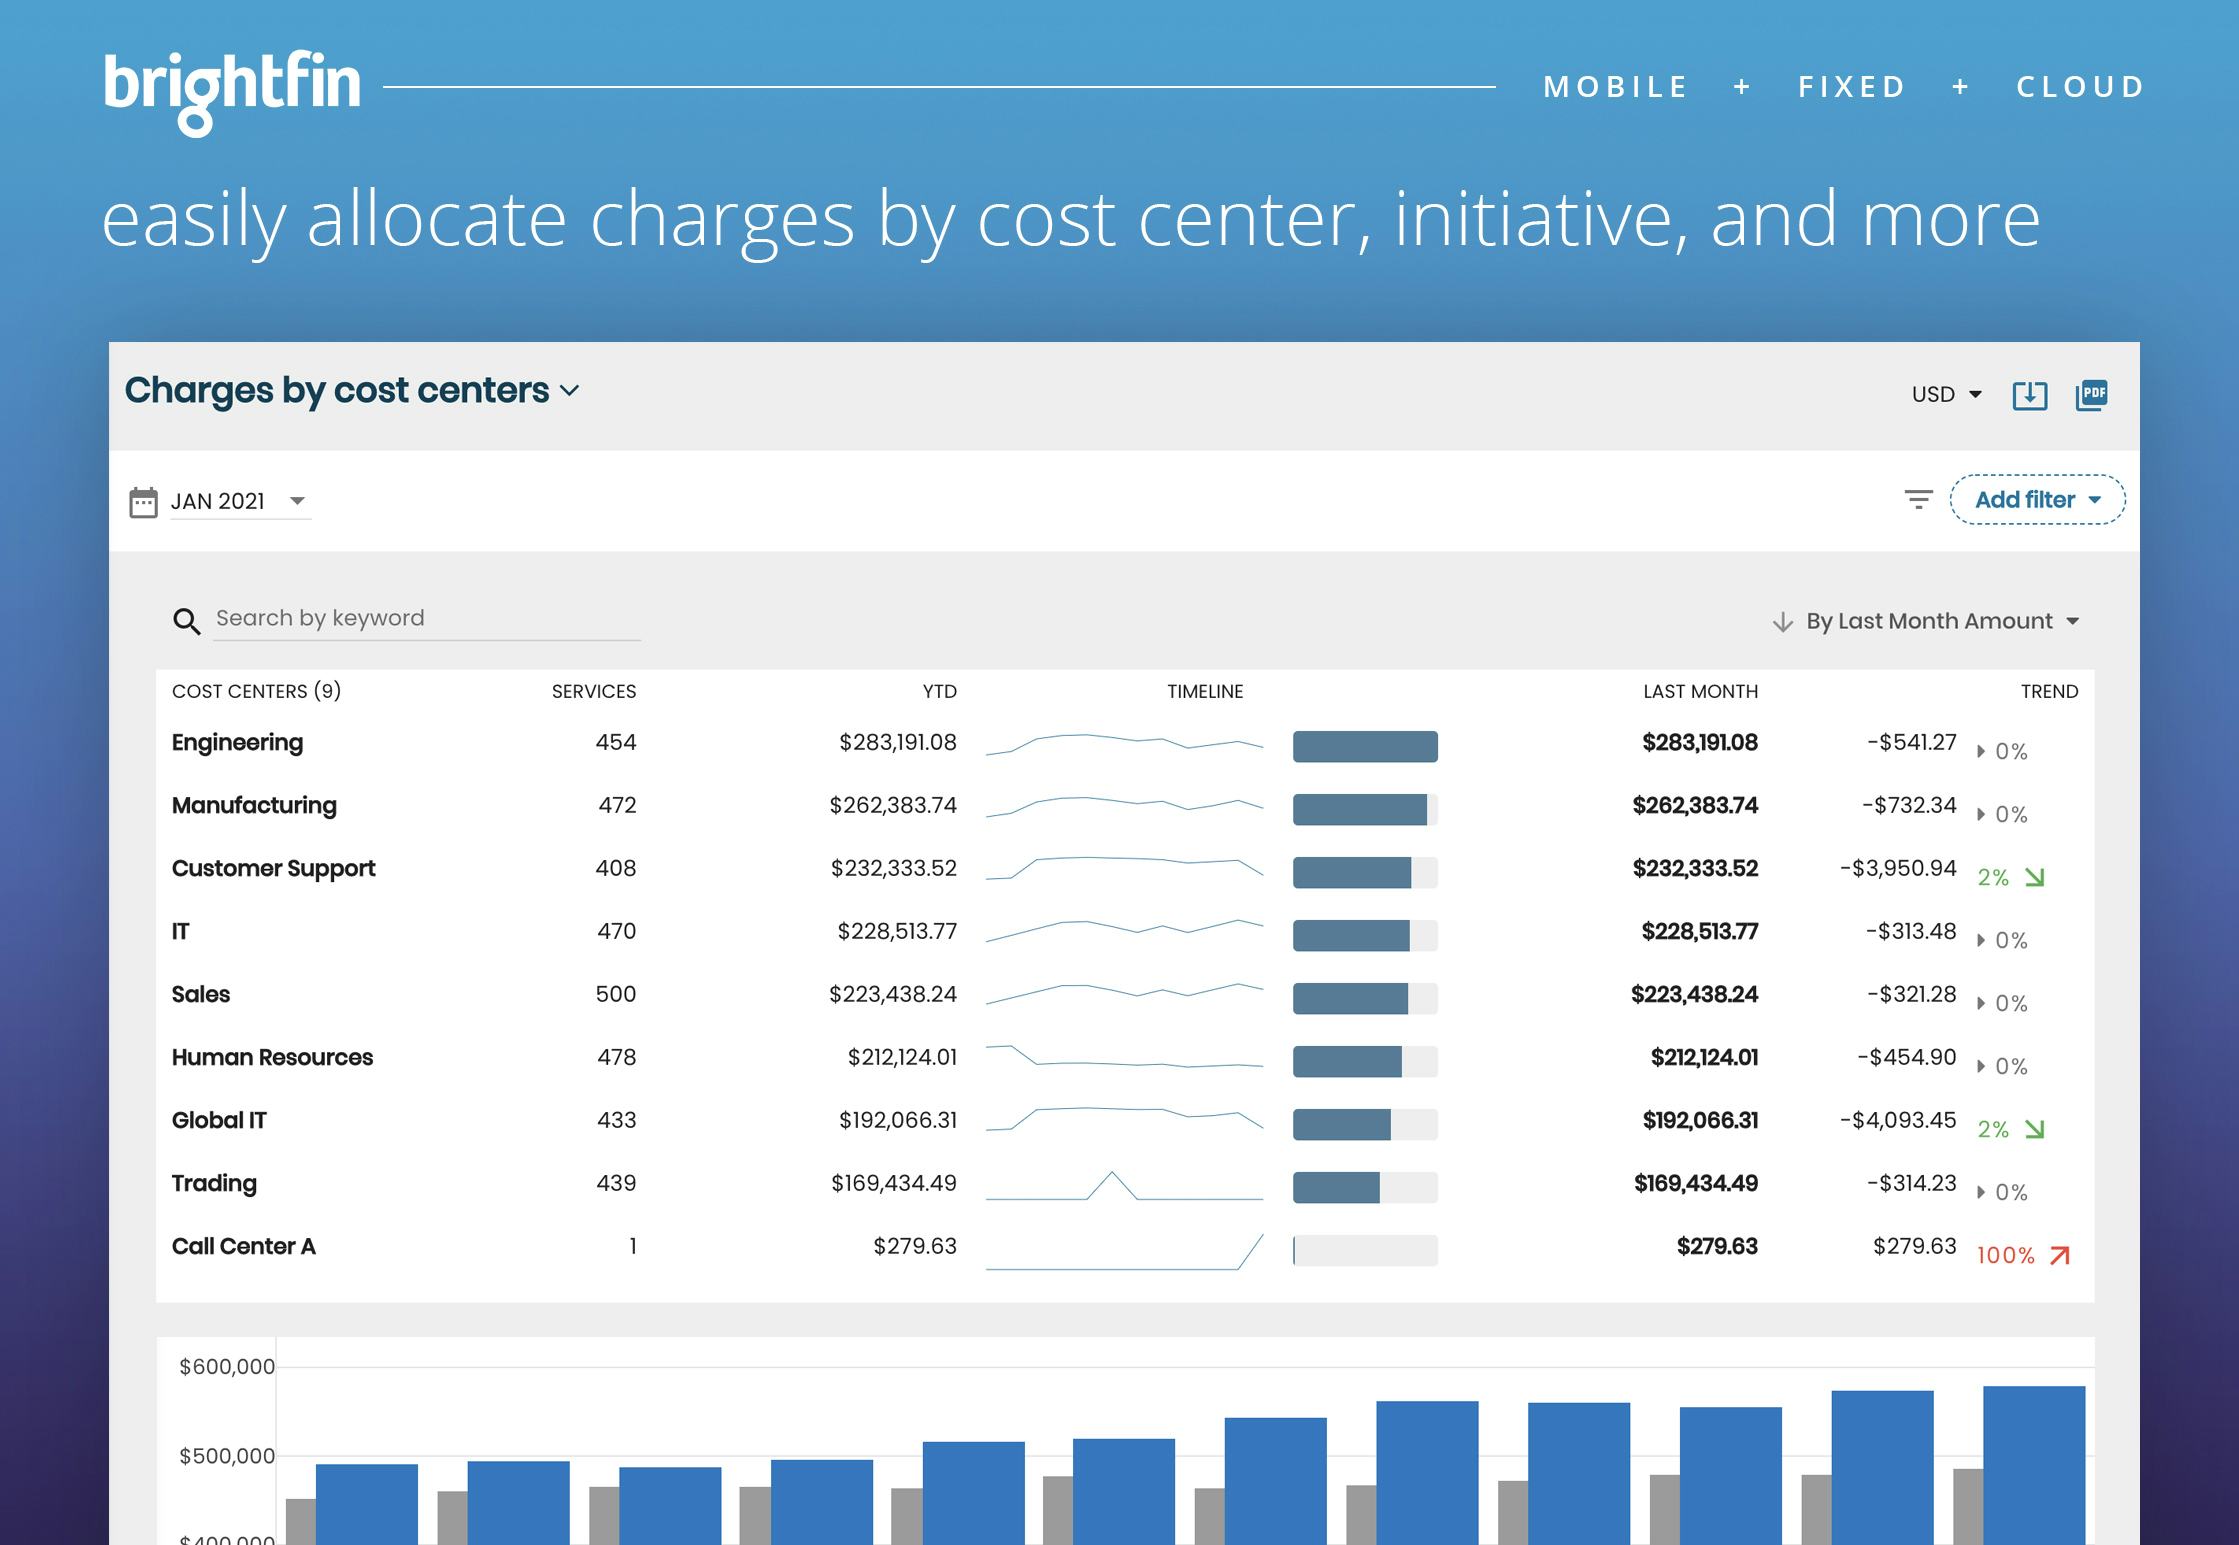 brightfin Software - Easily allocate charges by cost center, initiative, and more